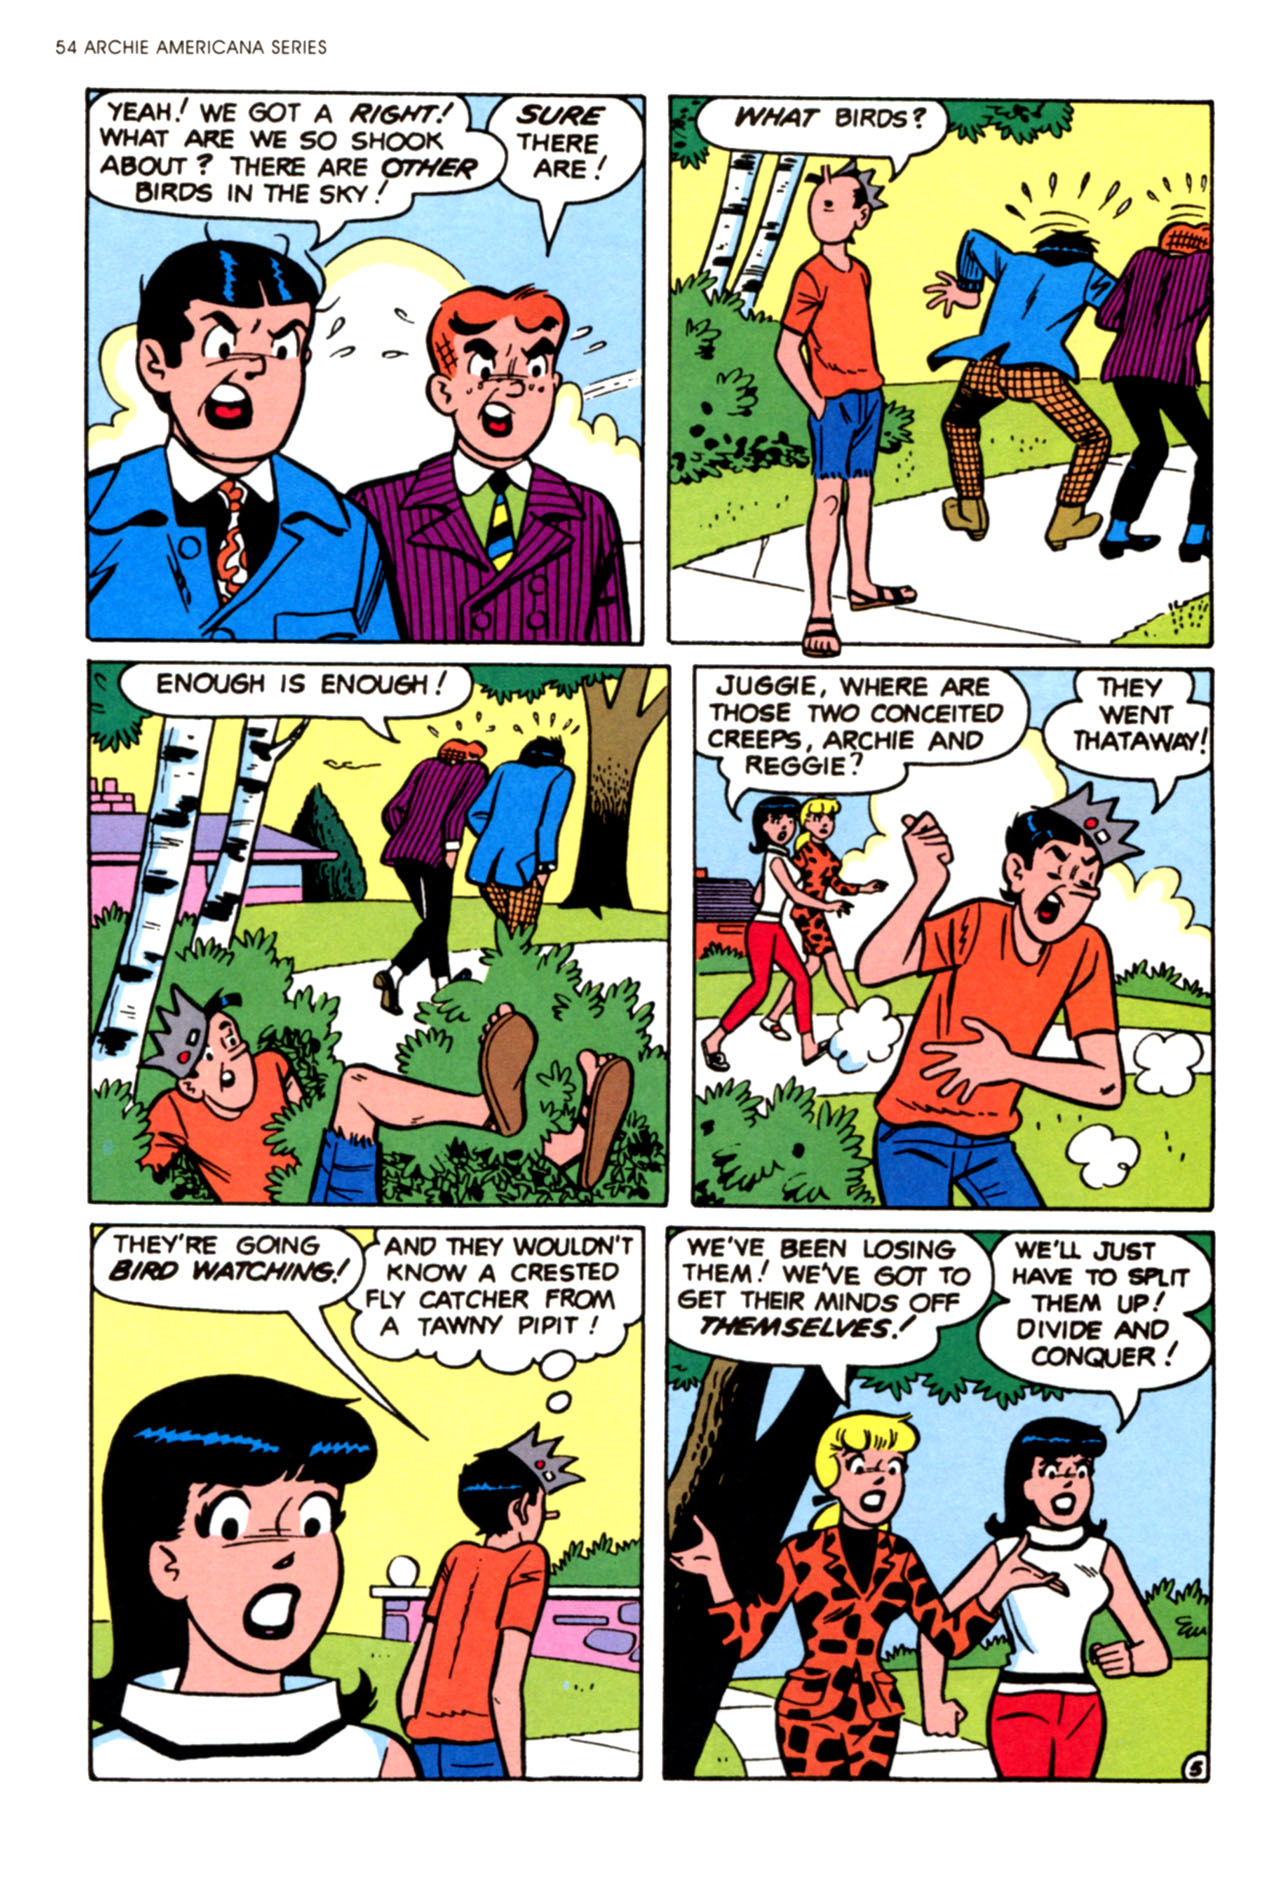 Read online Archie Americana Series comic -  Issue # TPB 3 - 56